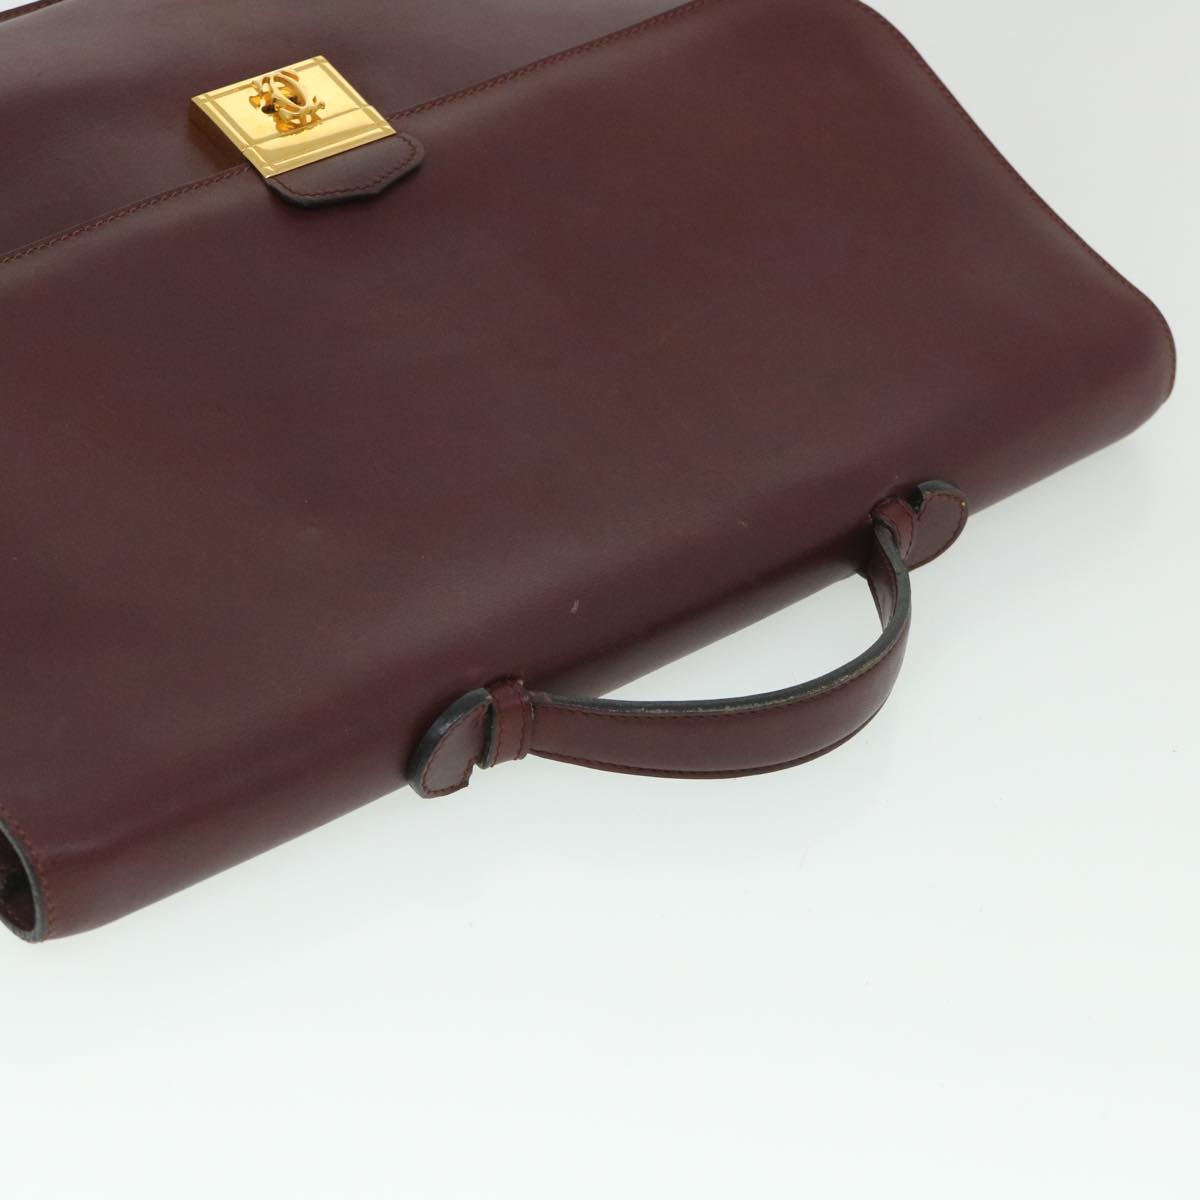 CARTIER Business Bag Leather Wine Red Auth bs8739